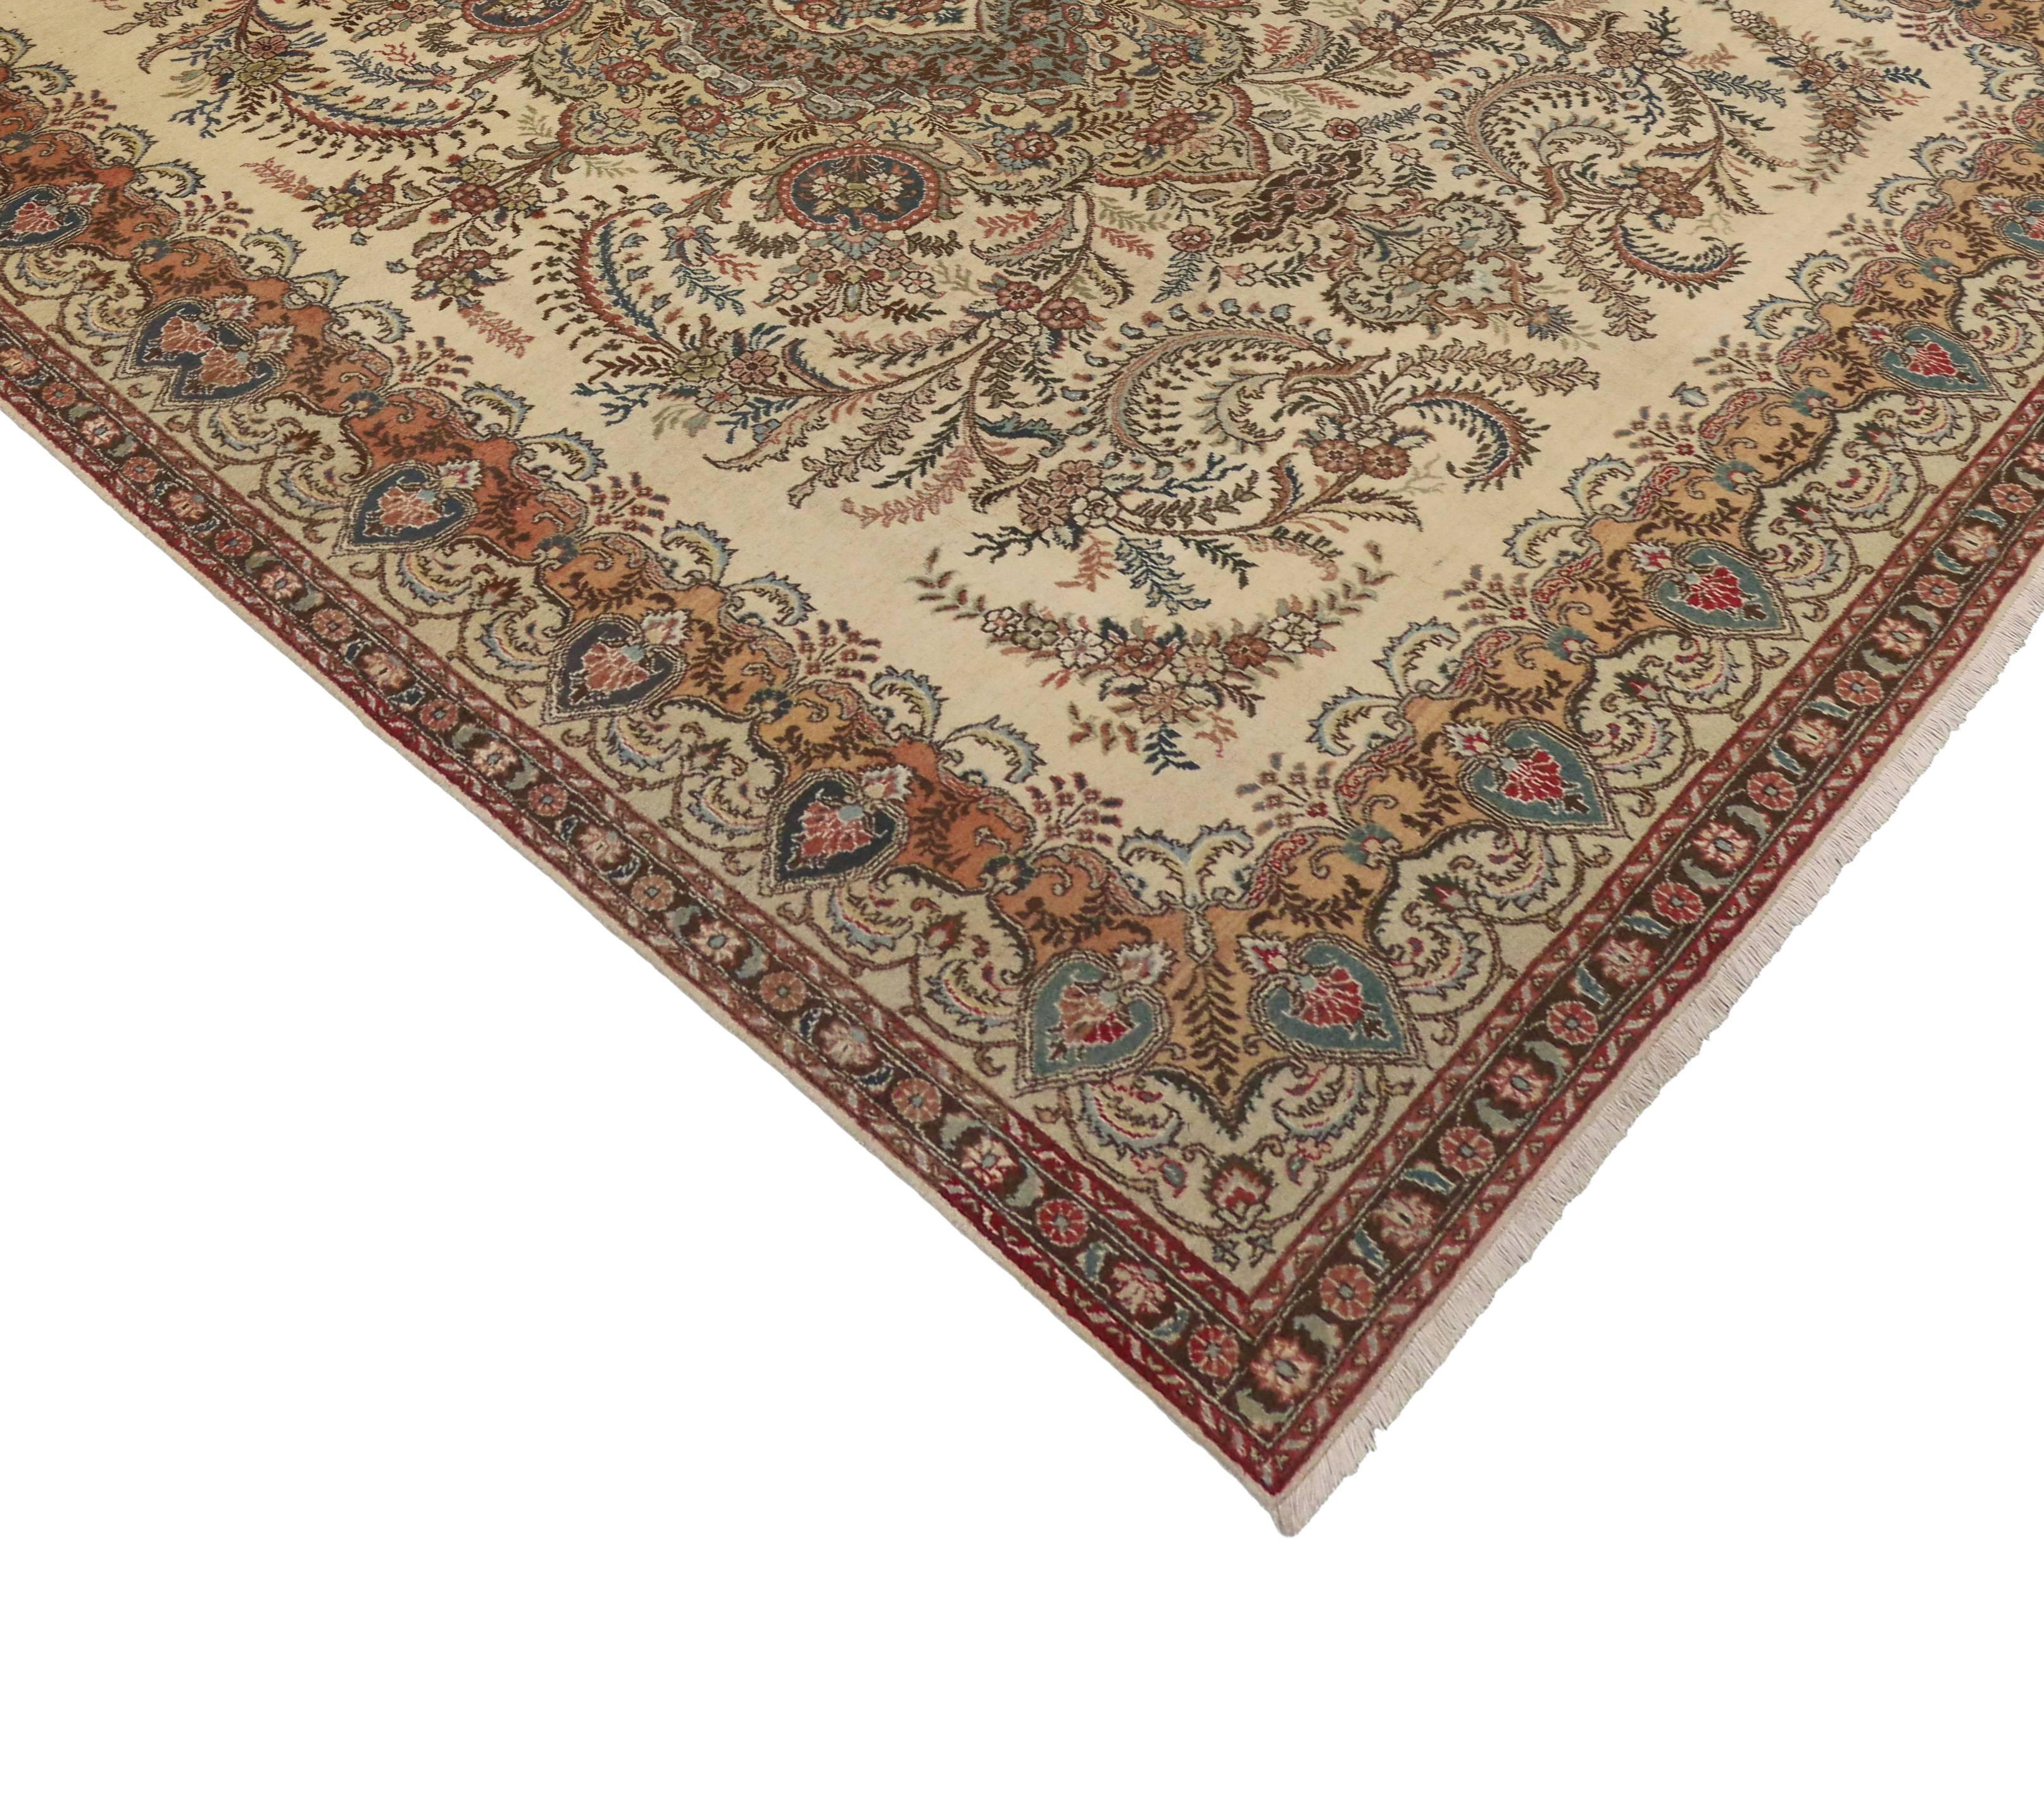 76285 vintage Persian Tabriz rug in light colors. Absolutely magnificent with traditional style and light colors, this vintage Persian Tabriz rug is characterized by an impeccable level of detail. This Persian Tabriz rug features an ornate centre